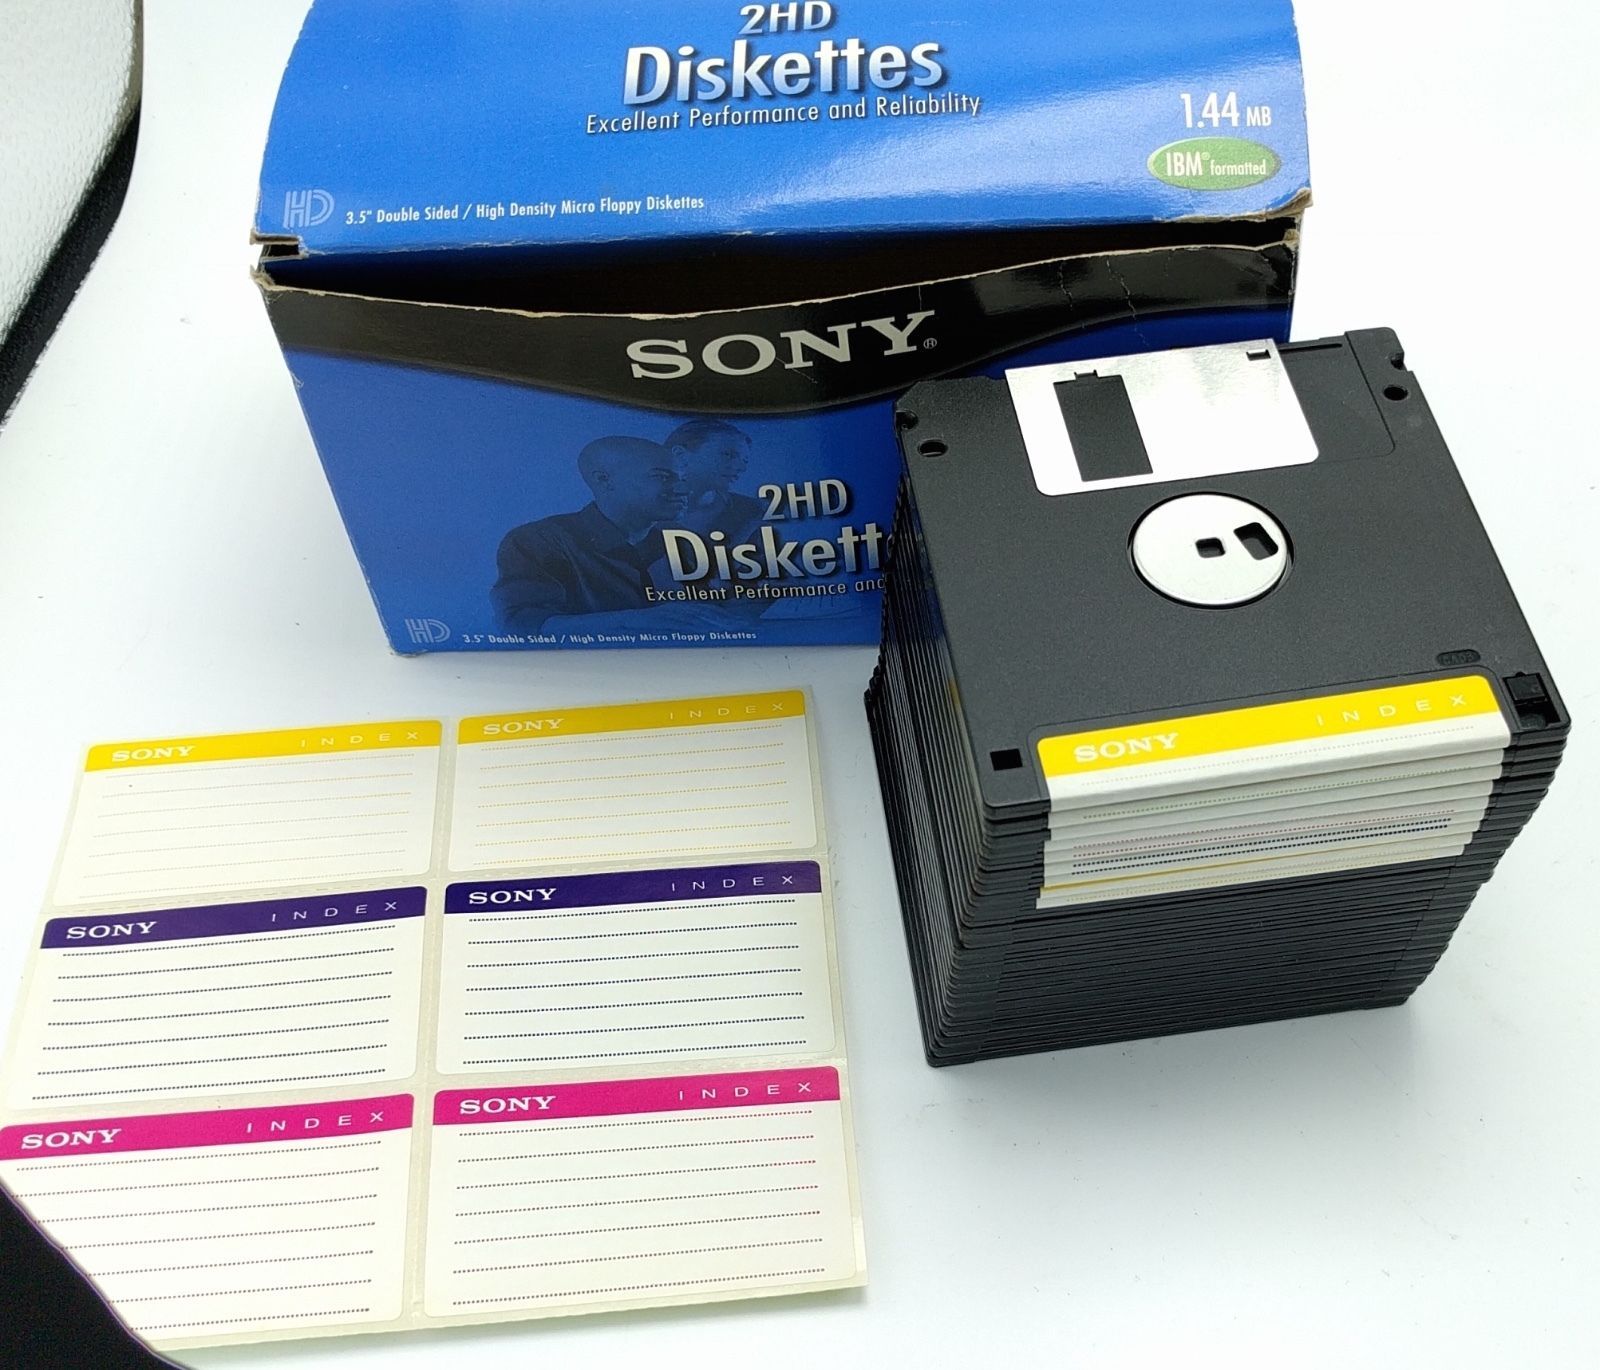 all floppy disks are formatted as fat